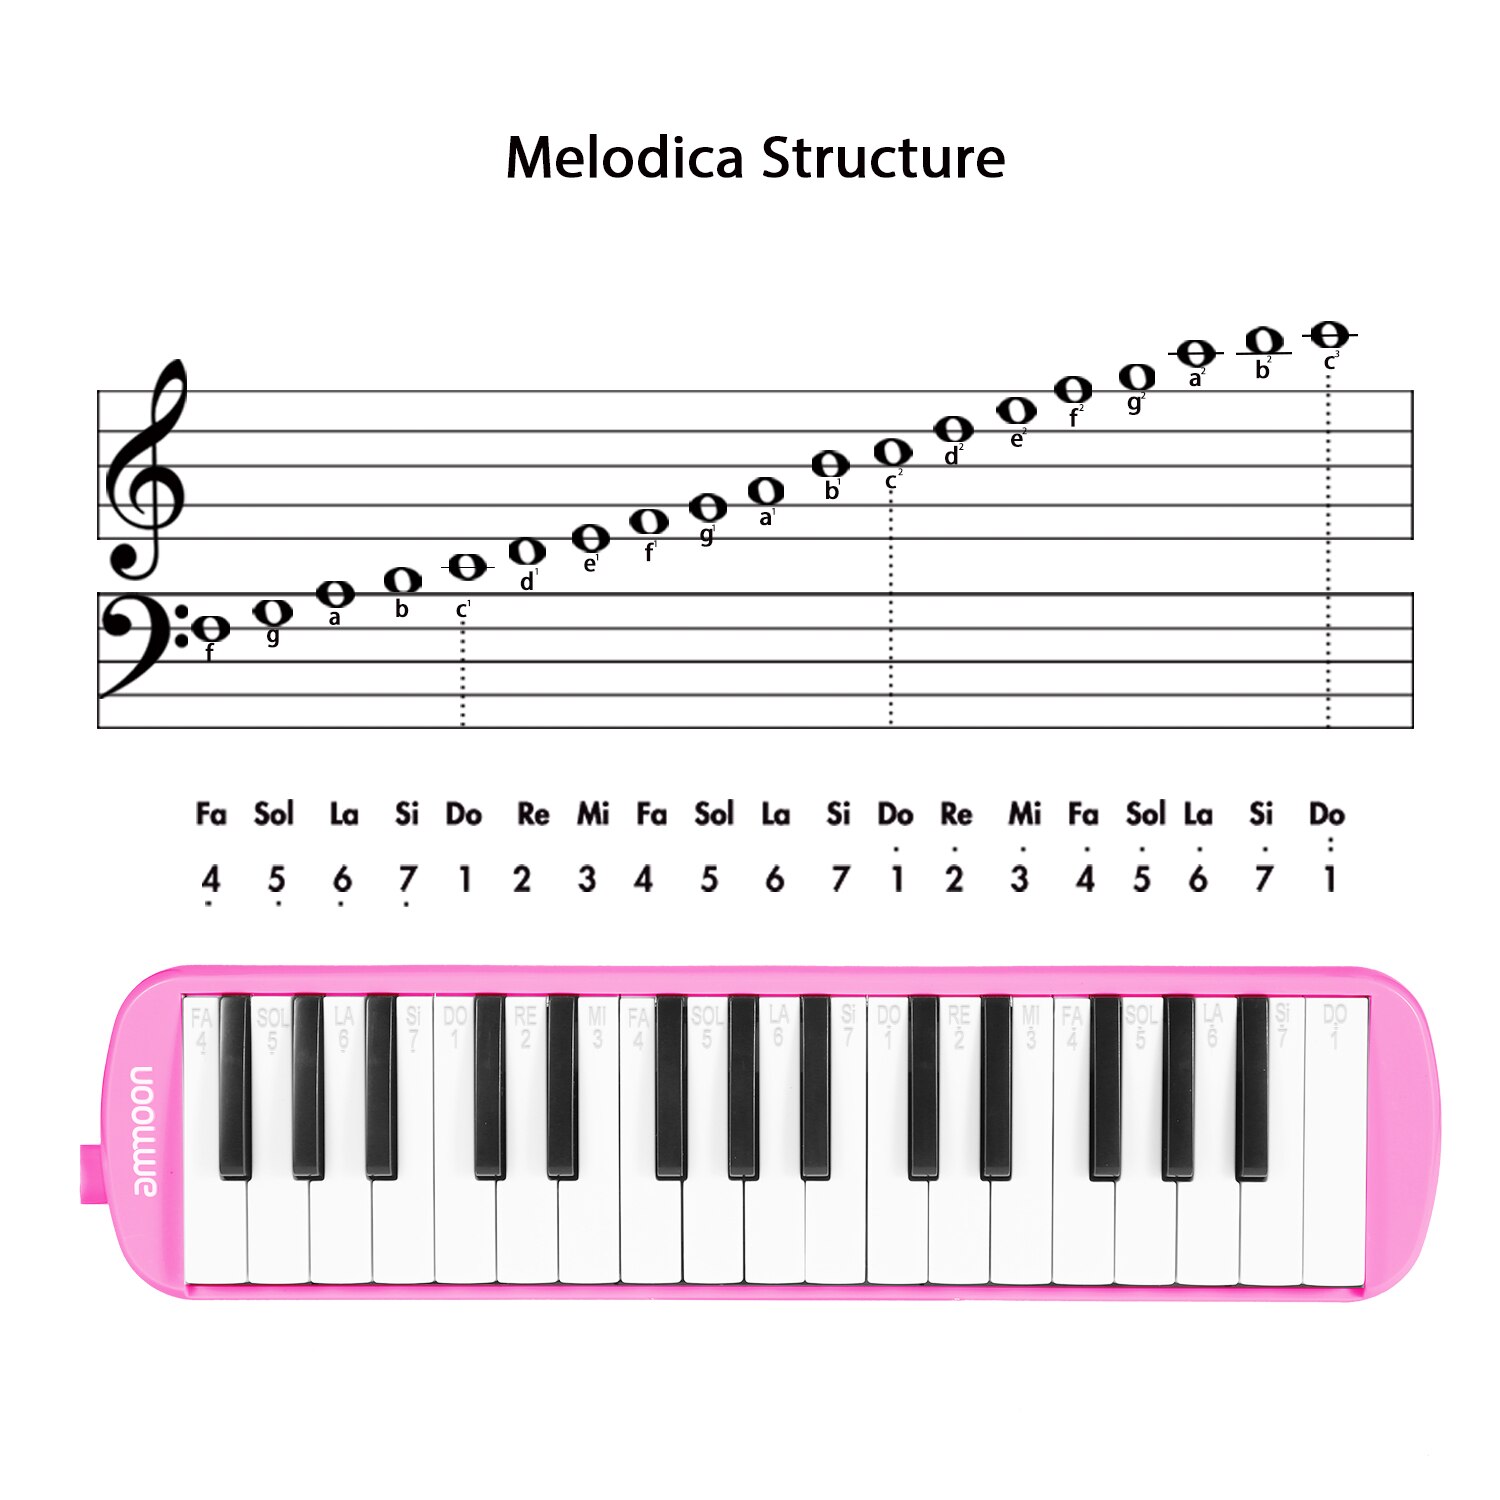 32 Keys Melodica Pianica Piano Style Keyboard Harmonica Mouth Organ Mouthpiece Cleaning Cloth Carry Case for Kids Musical